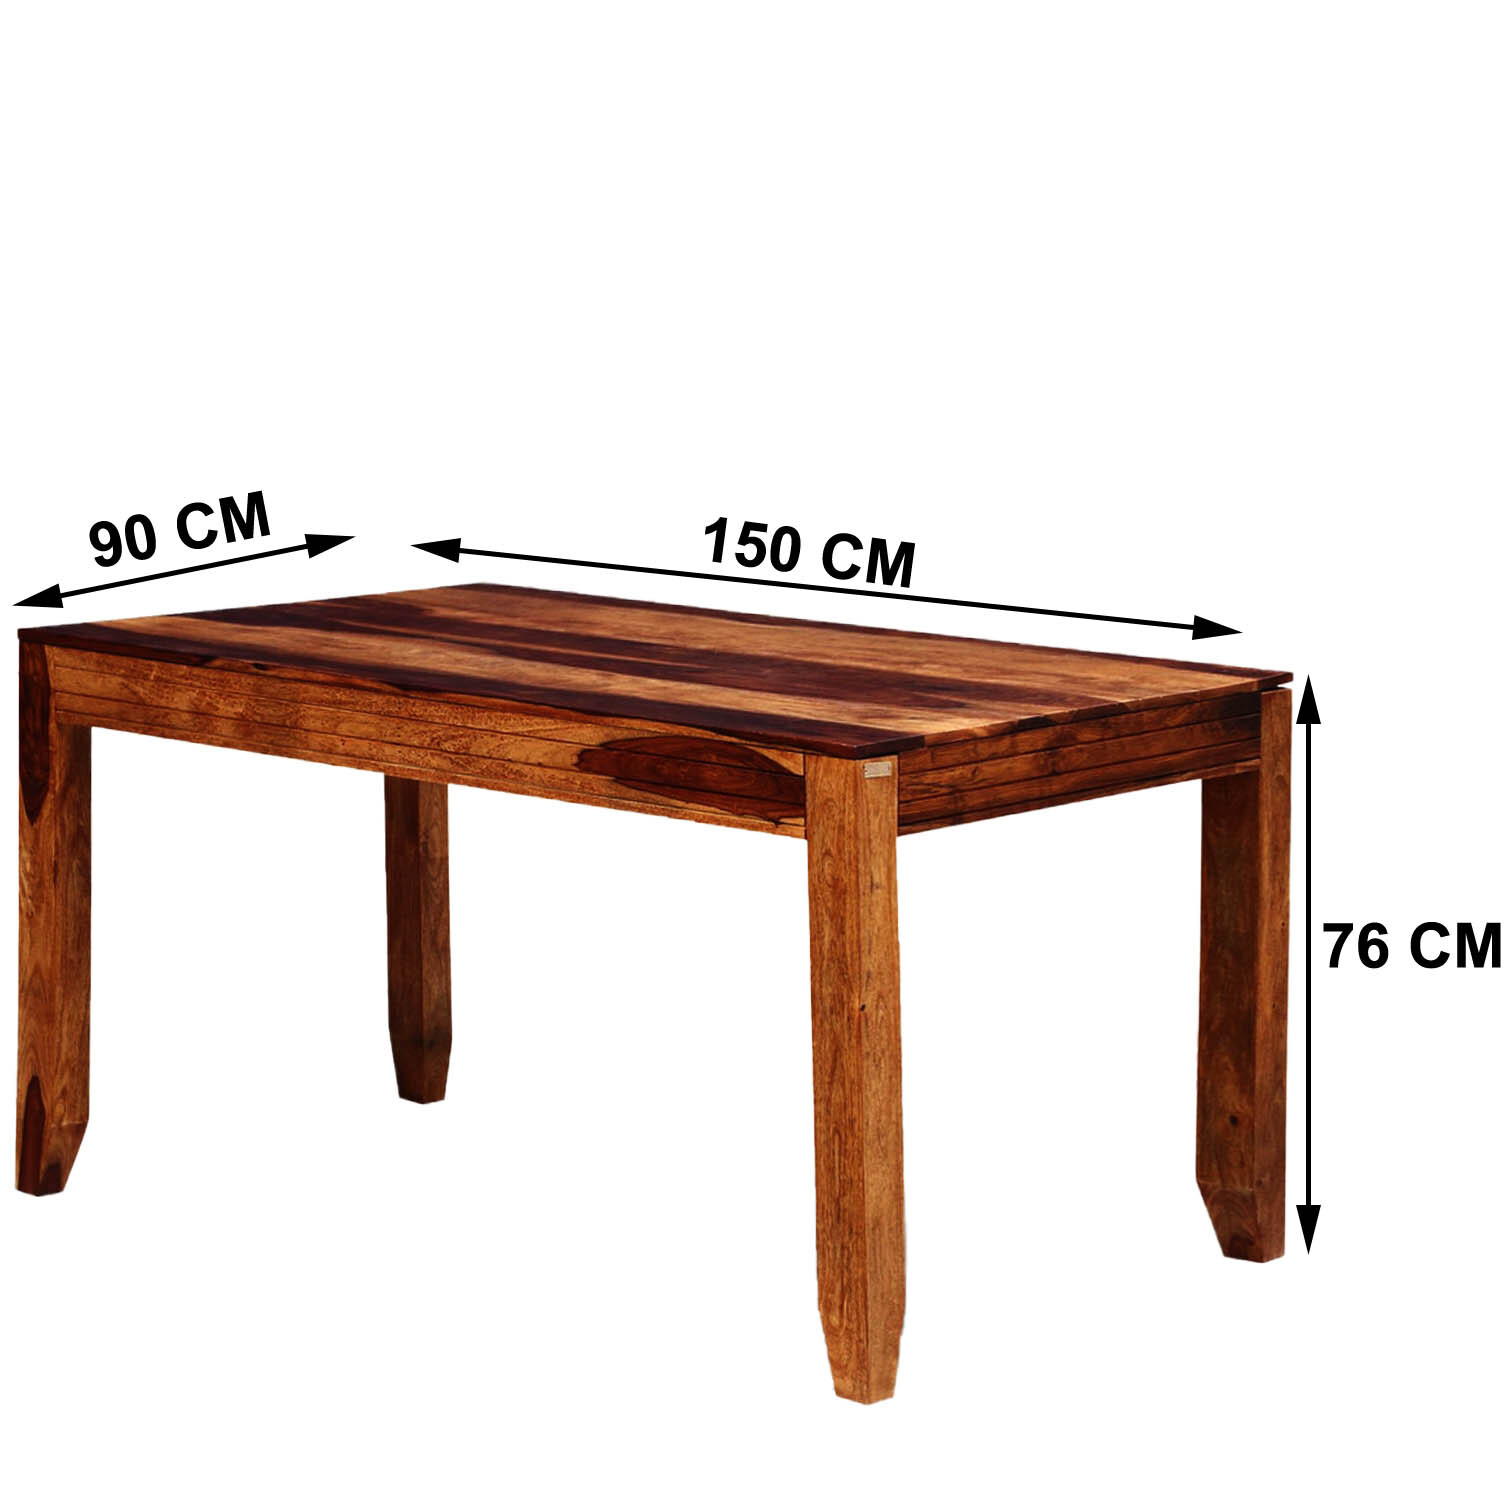 VIOLA DINING TABLE